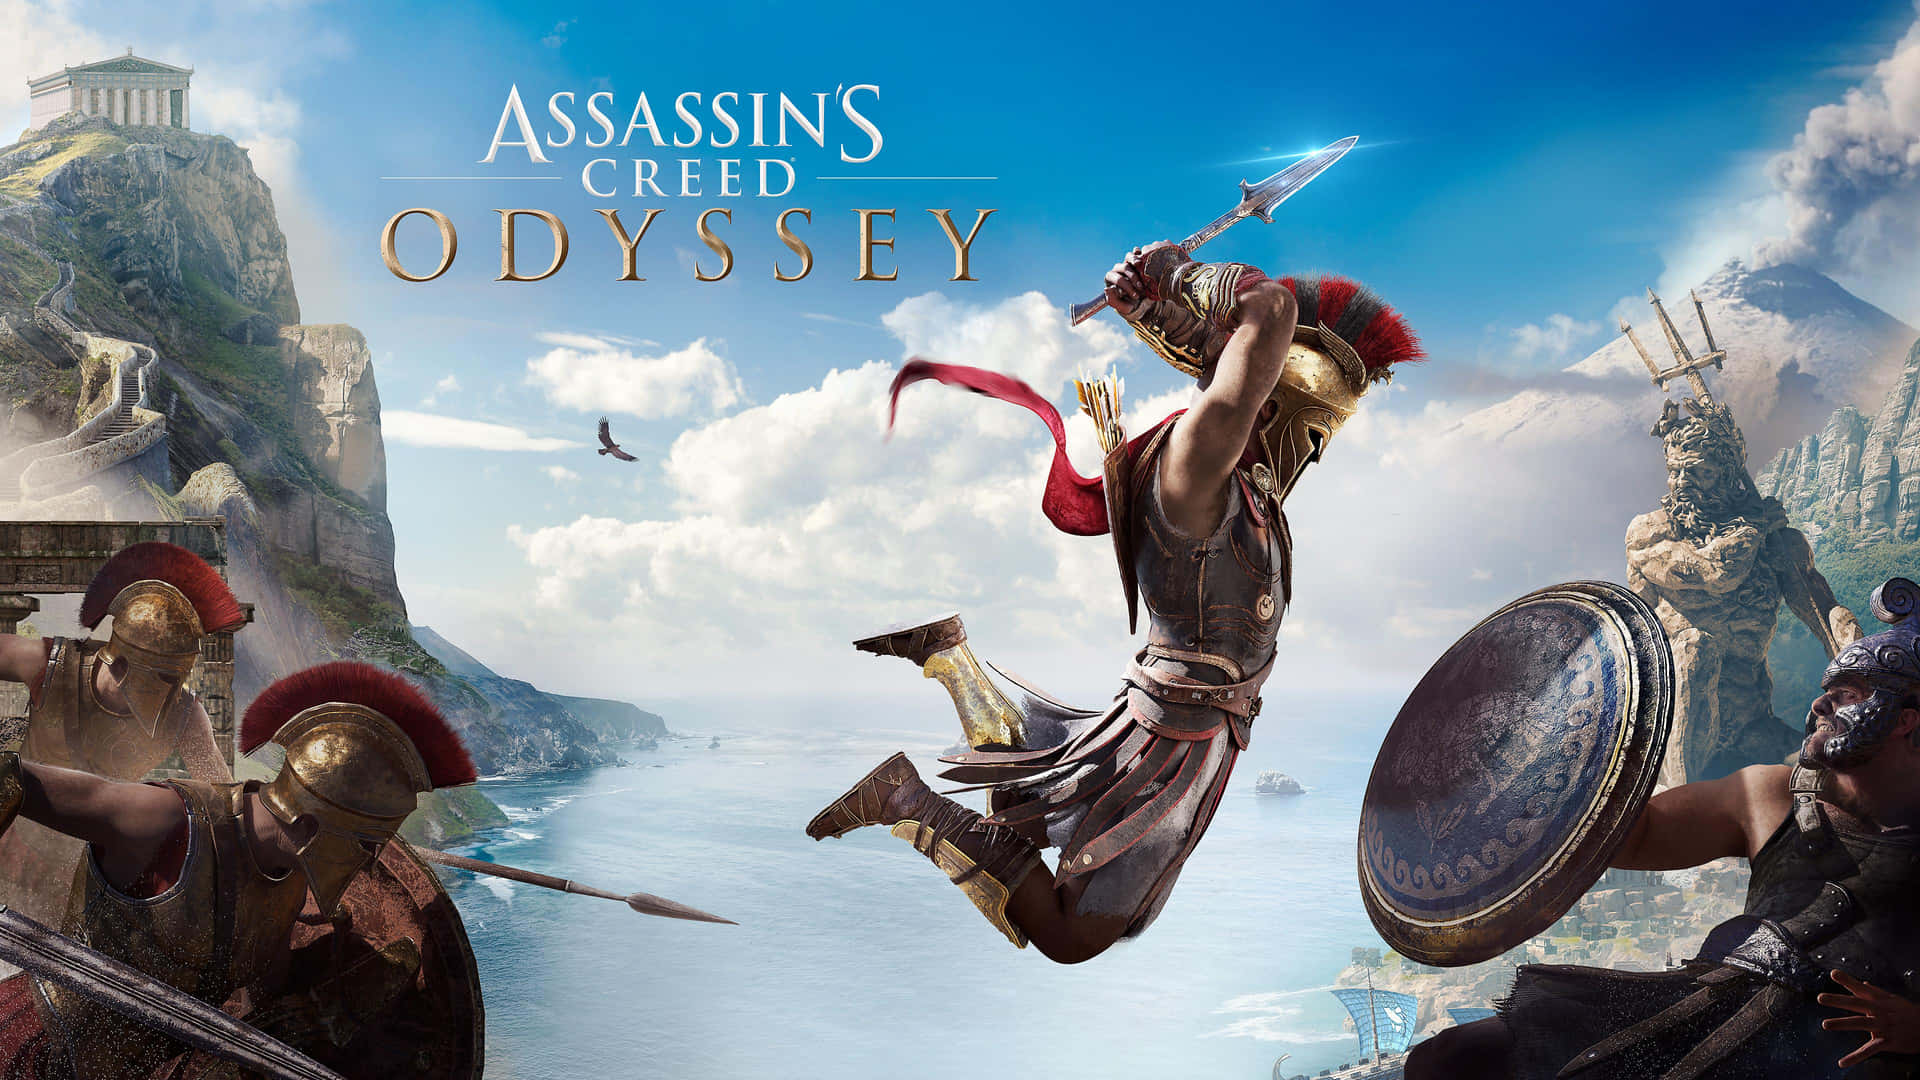 Assassin's Creed Odyssey Background Jumping Alexios